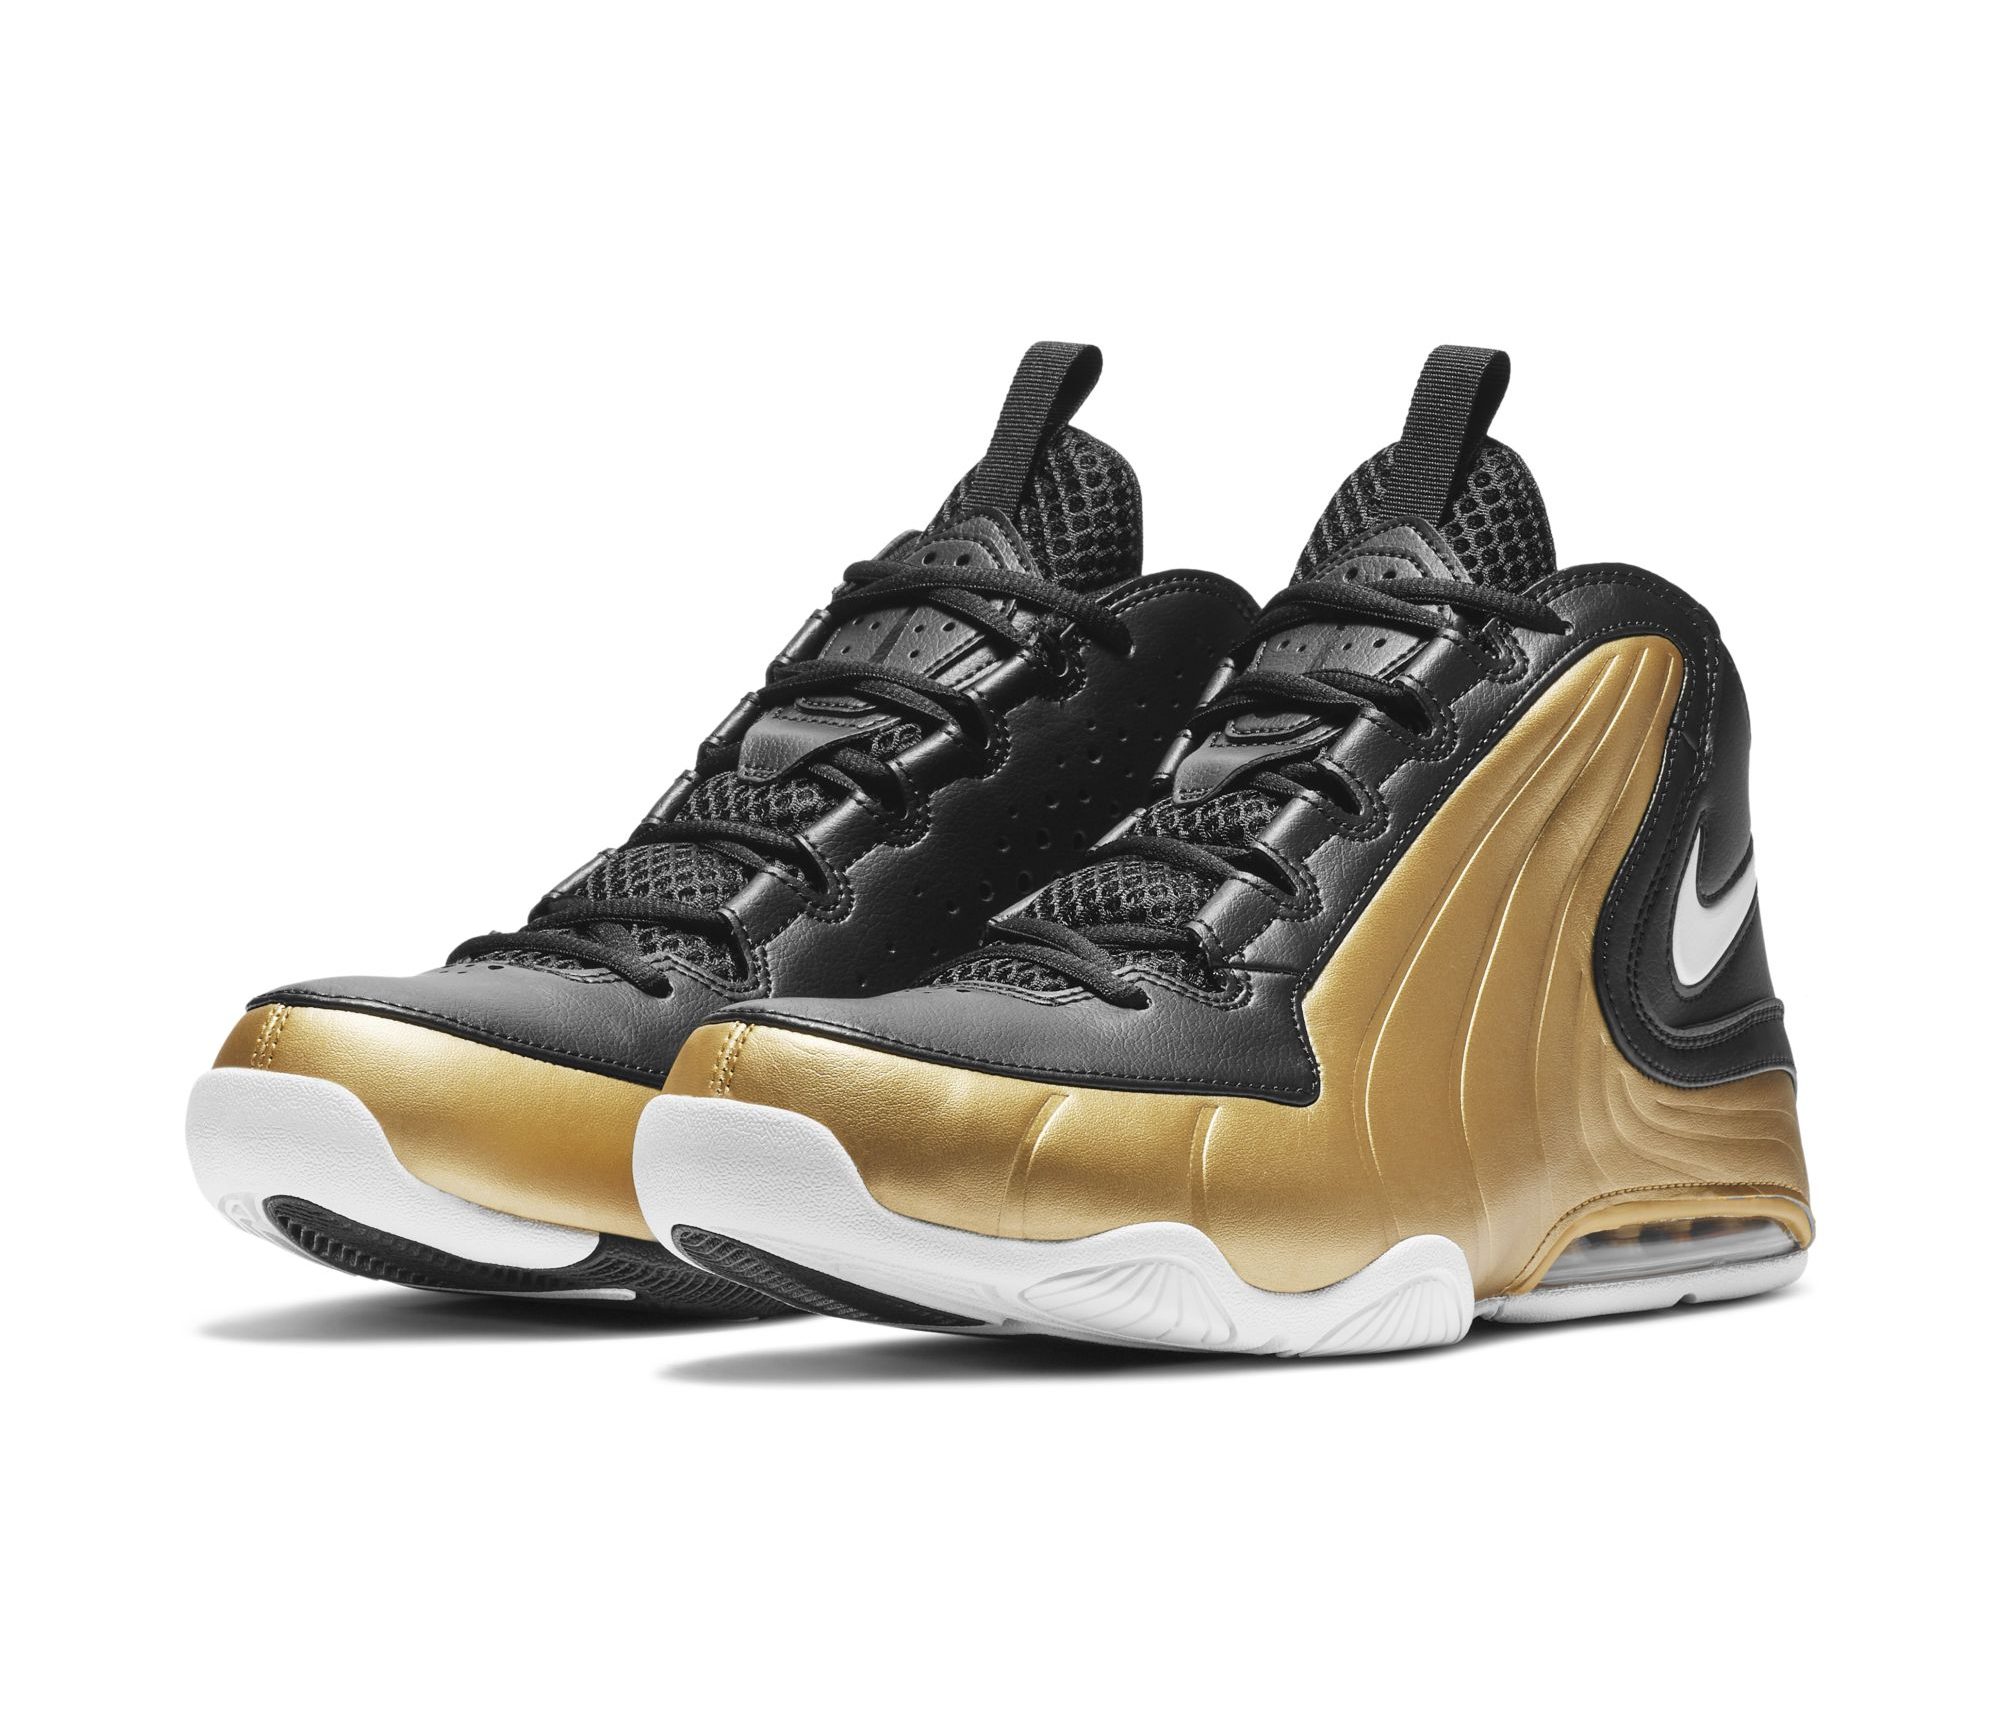 nike air max wavy gold - WearTesters